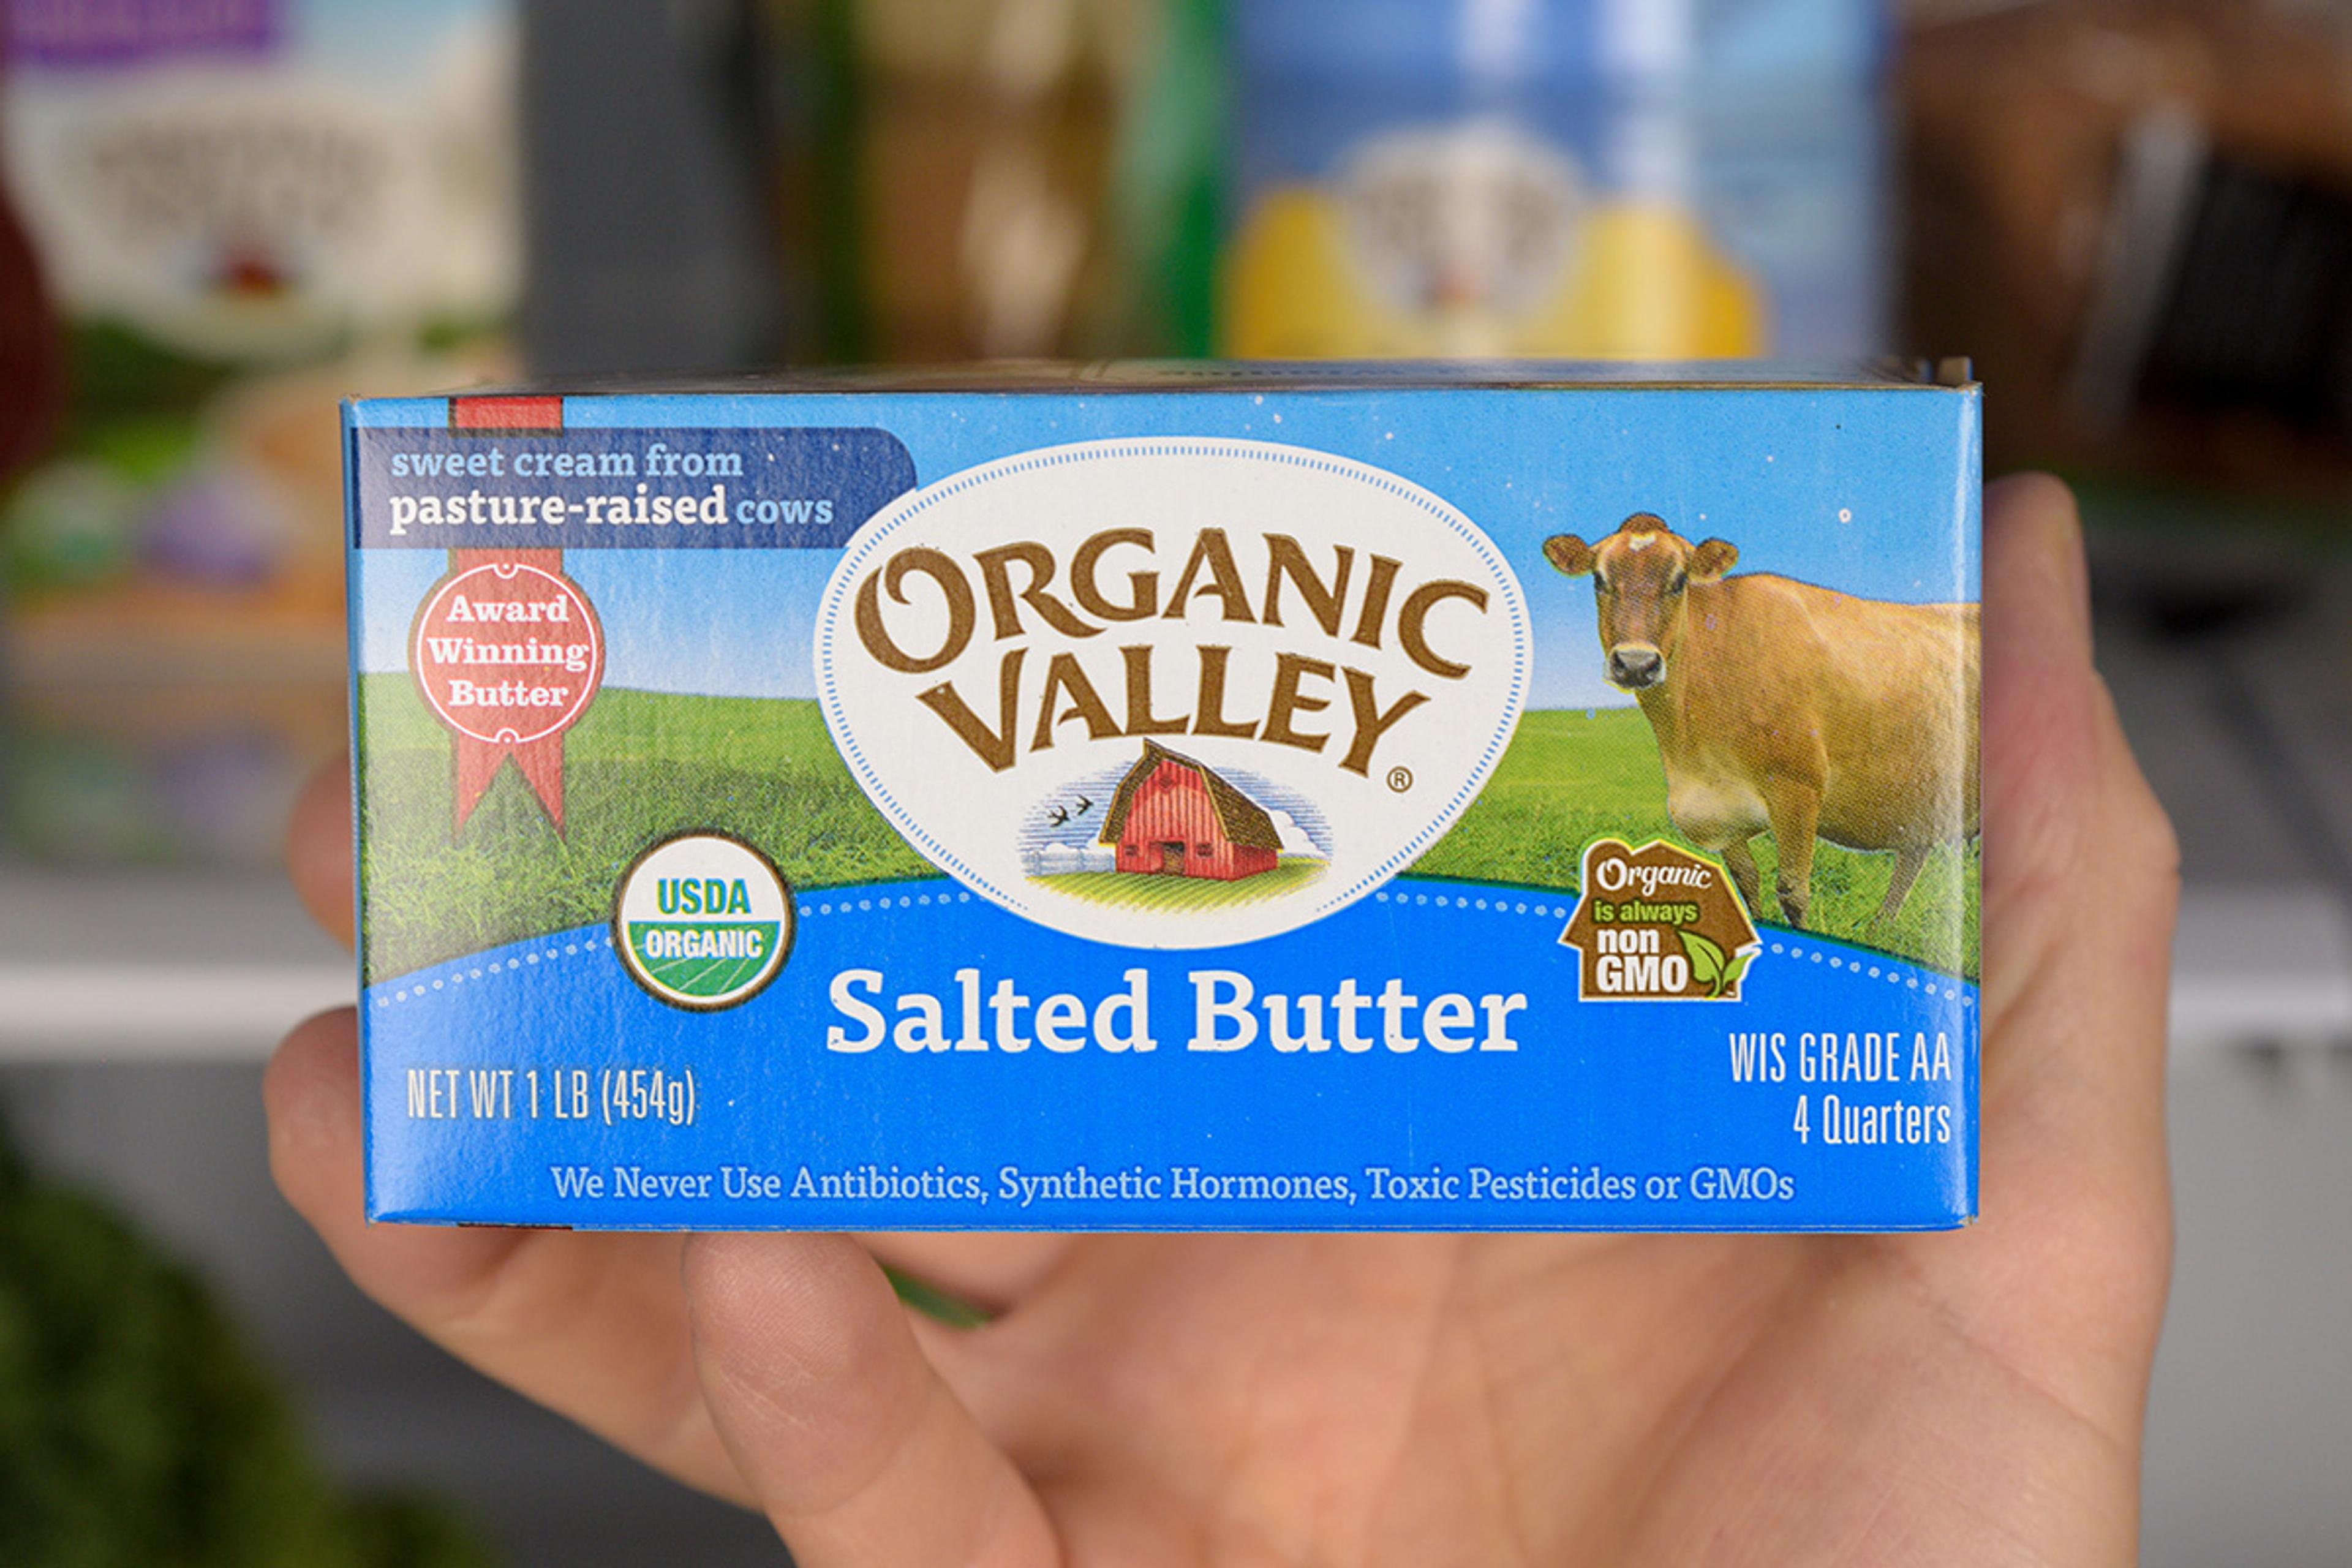 Organic Valley organic butter in front of a stocked fridge.